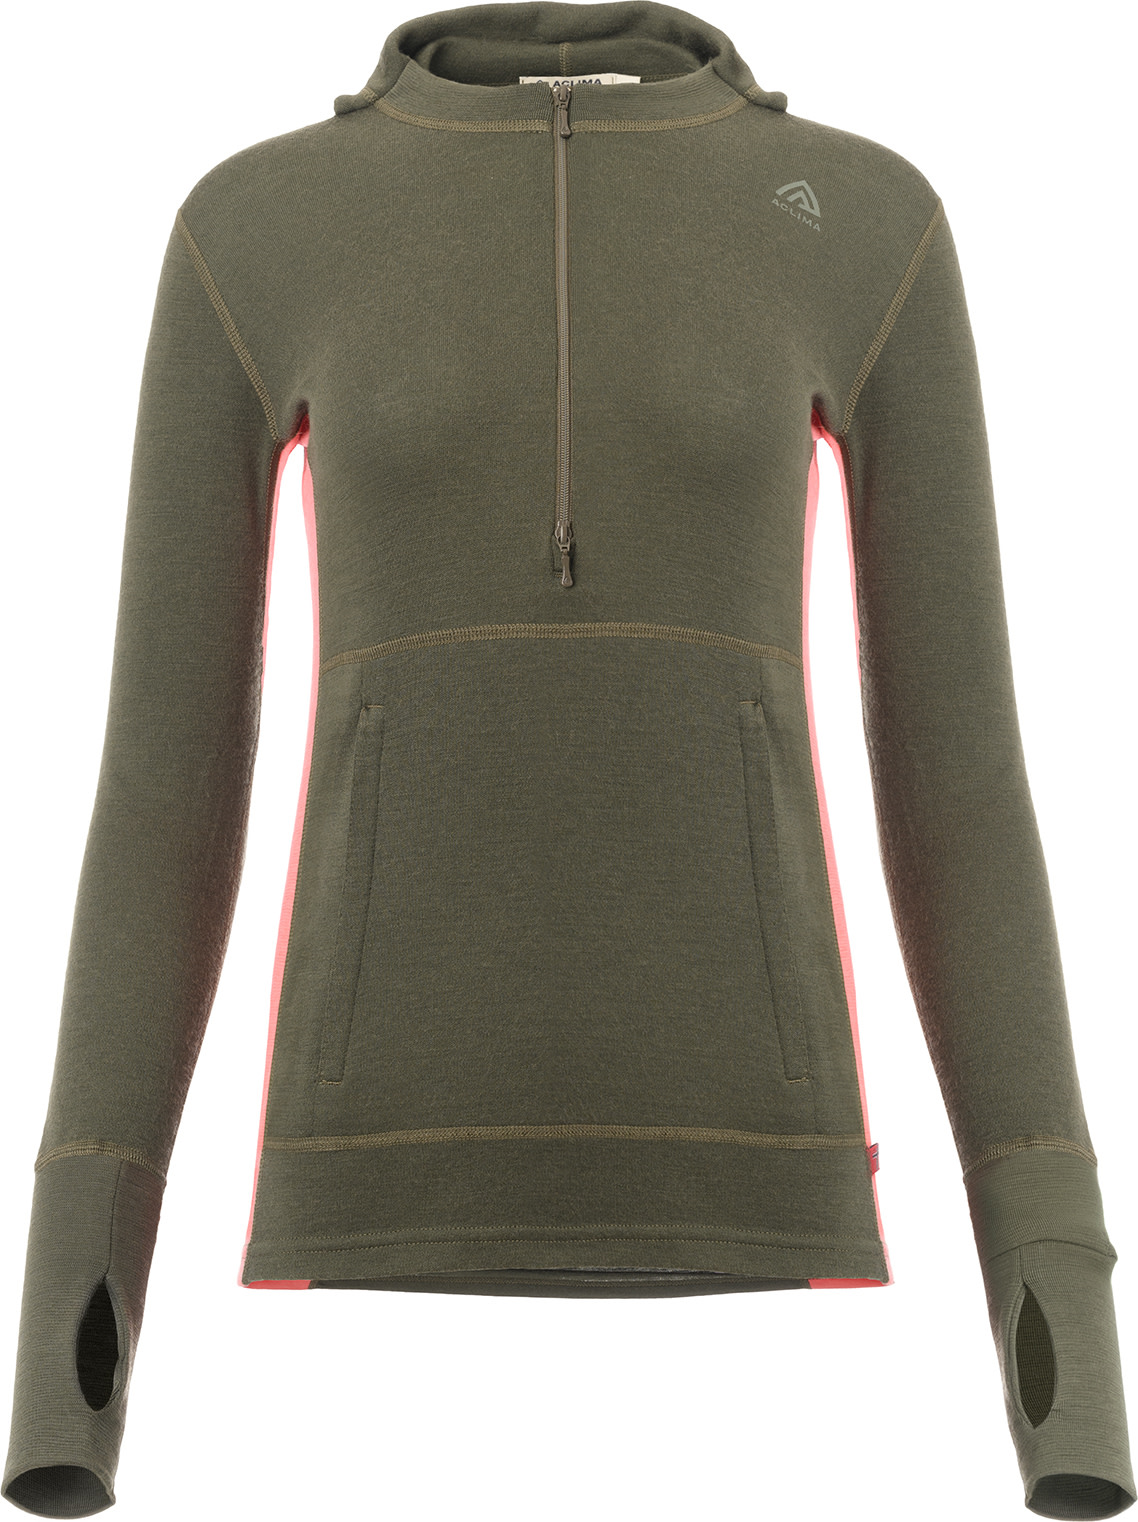 Aclima Women’s WarmWool Hoodsweater with Zip Olive Night/Spiced Coral